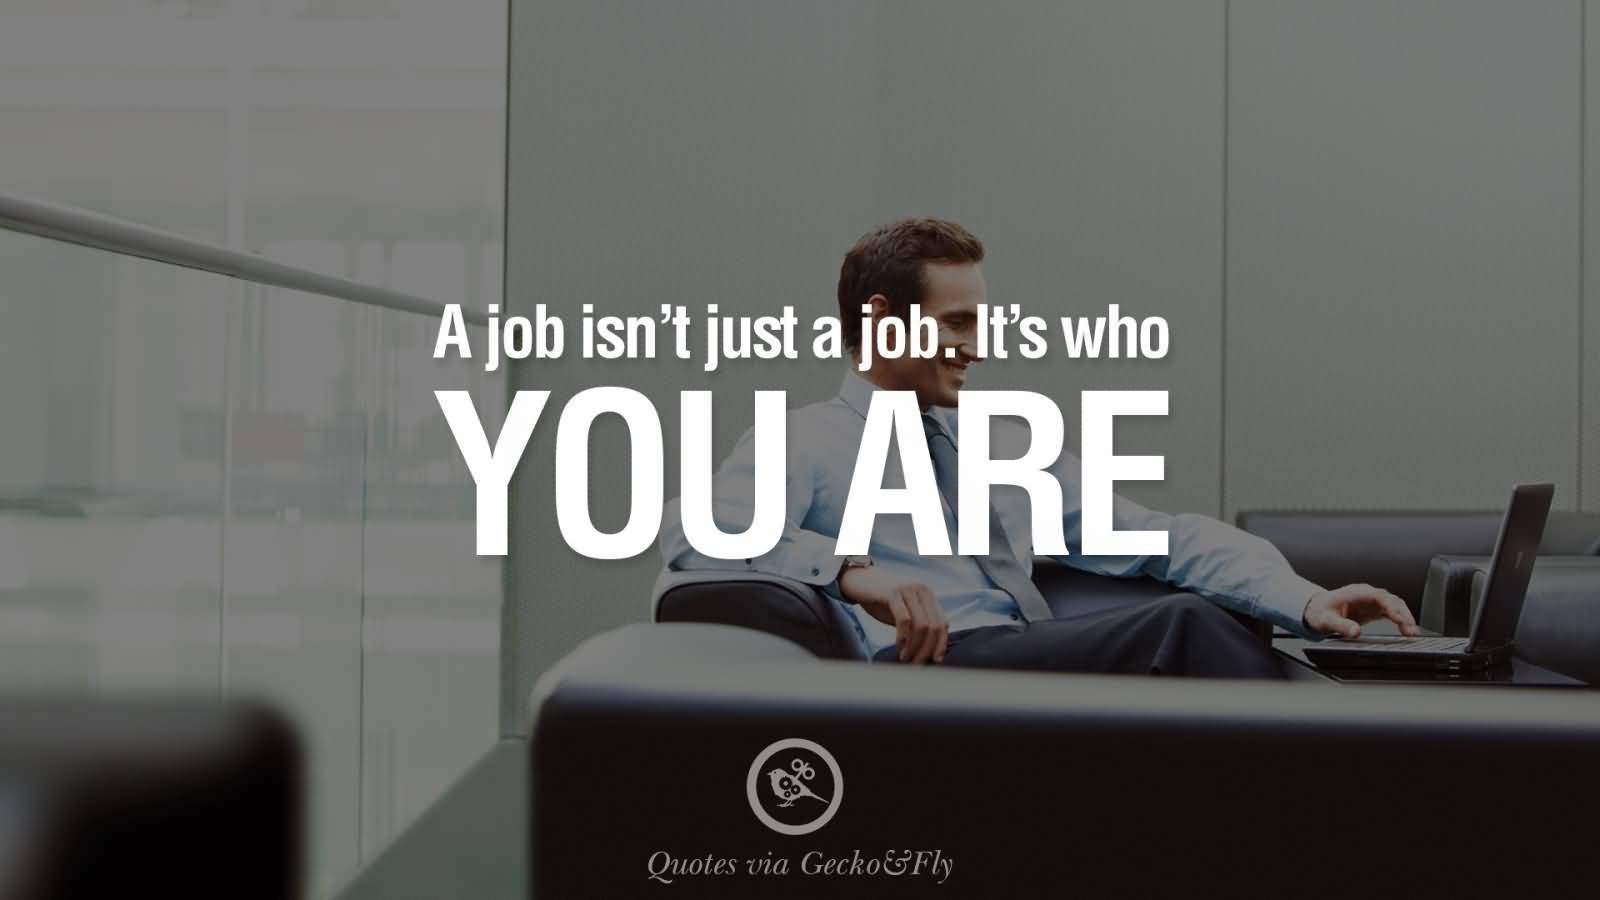 61 Top Job Quotes And Sayings